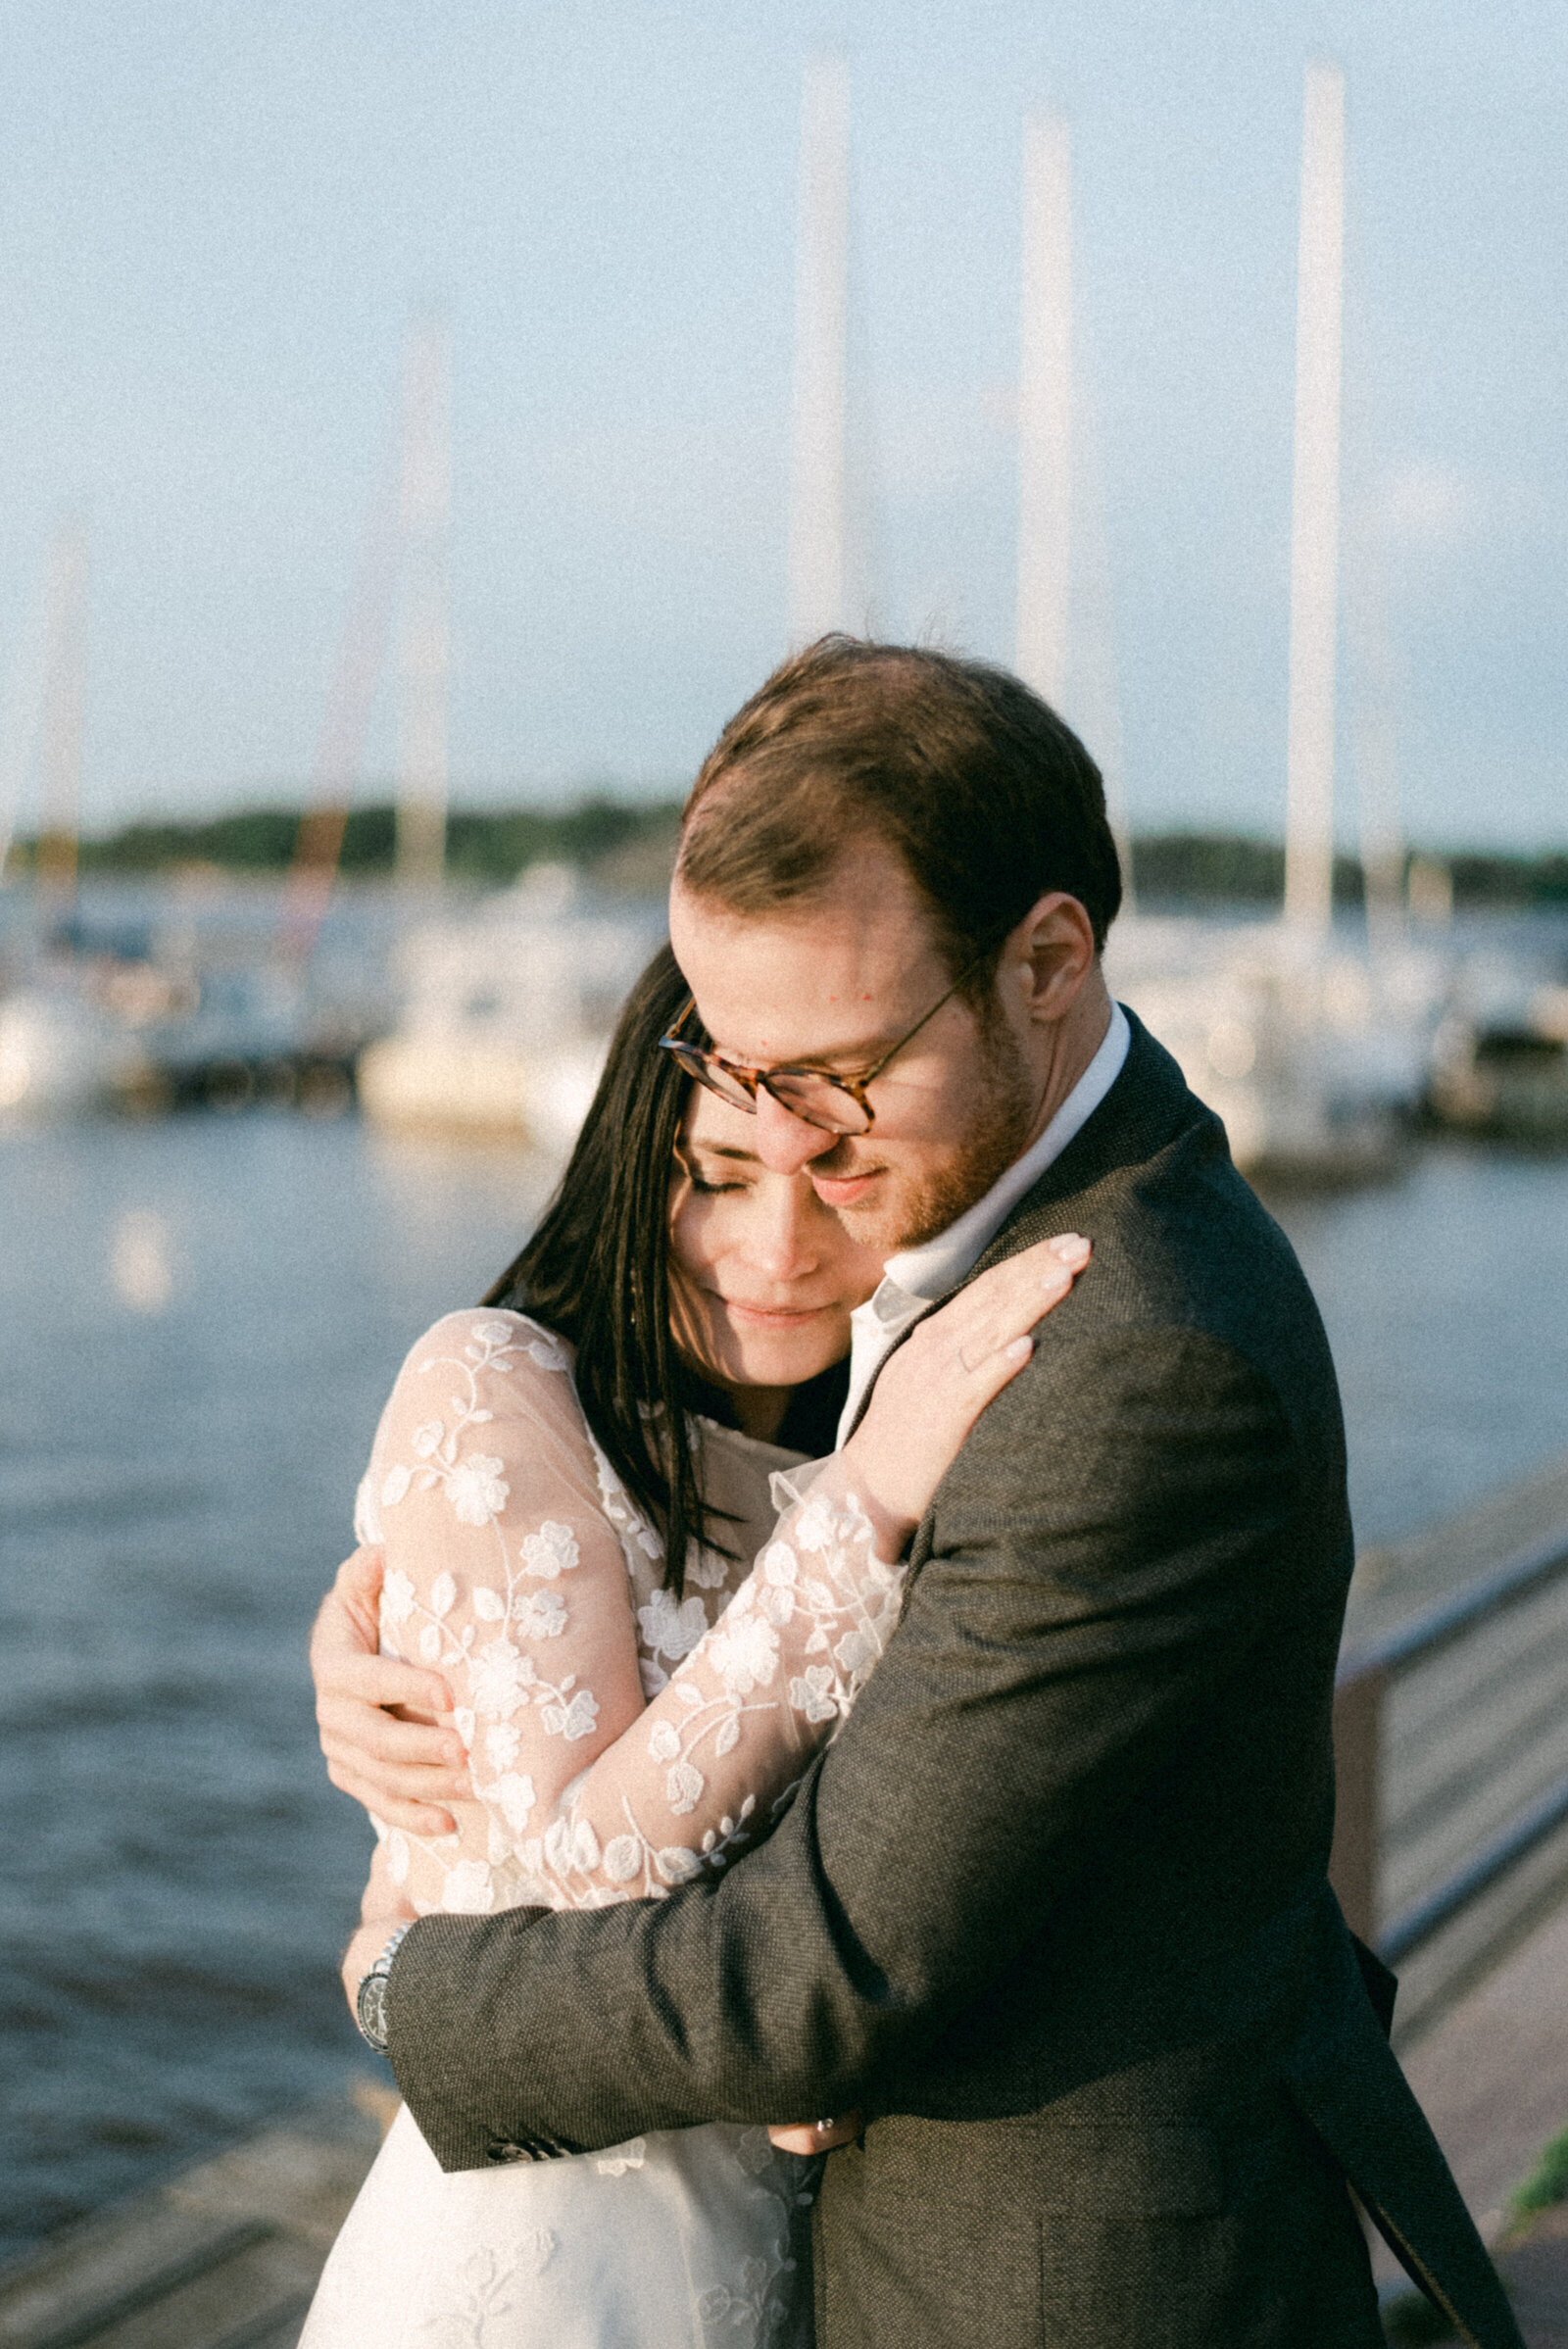 Seaside wedding photograph of a couple in love photographed by elopement photographer Hannika Gabrielsson in Helsinki.